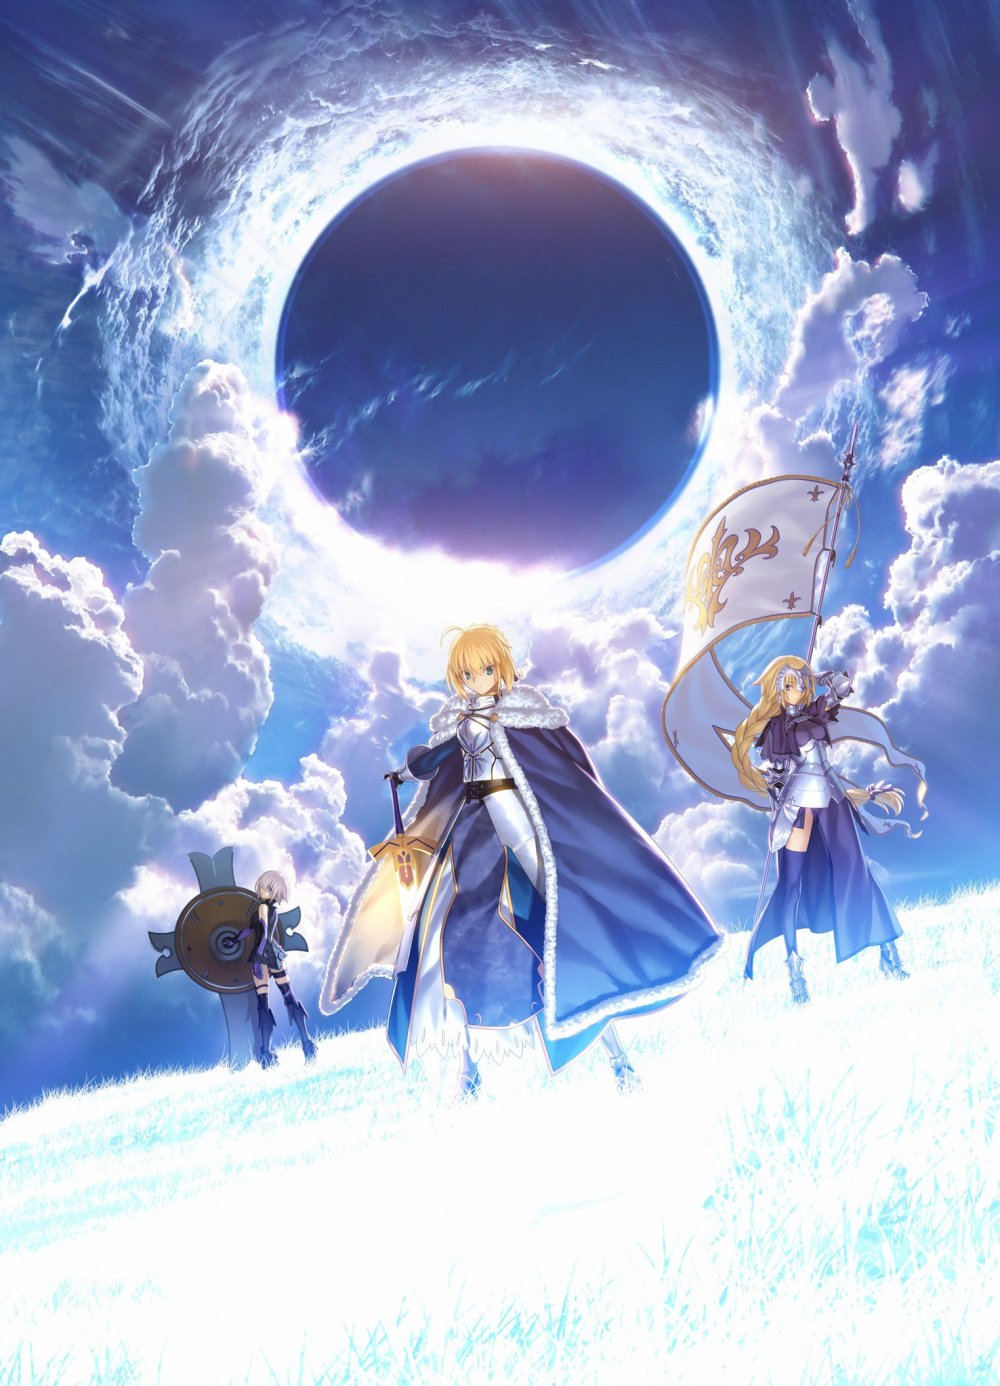 Type-Moon to release Fate/Grand Order Mobile Game